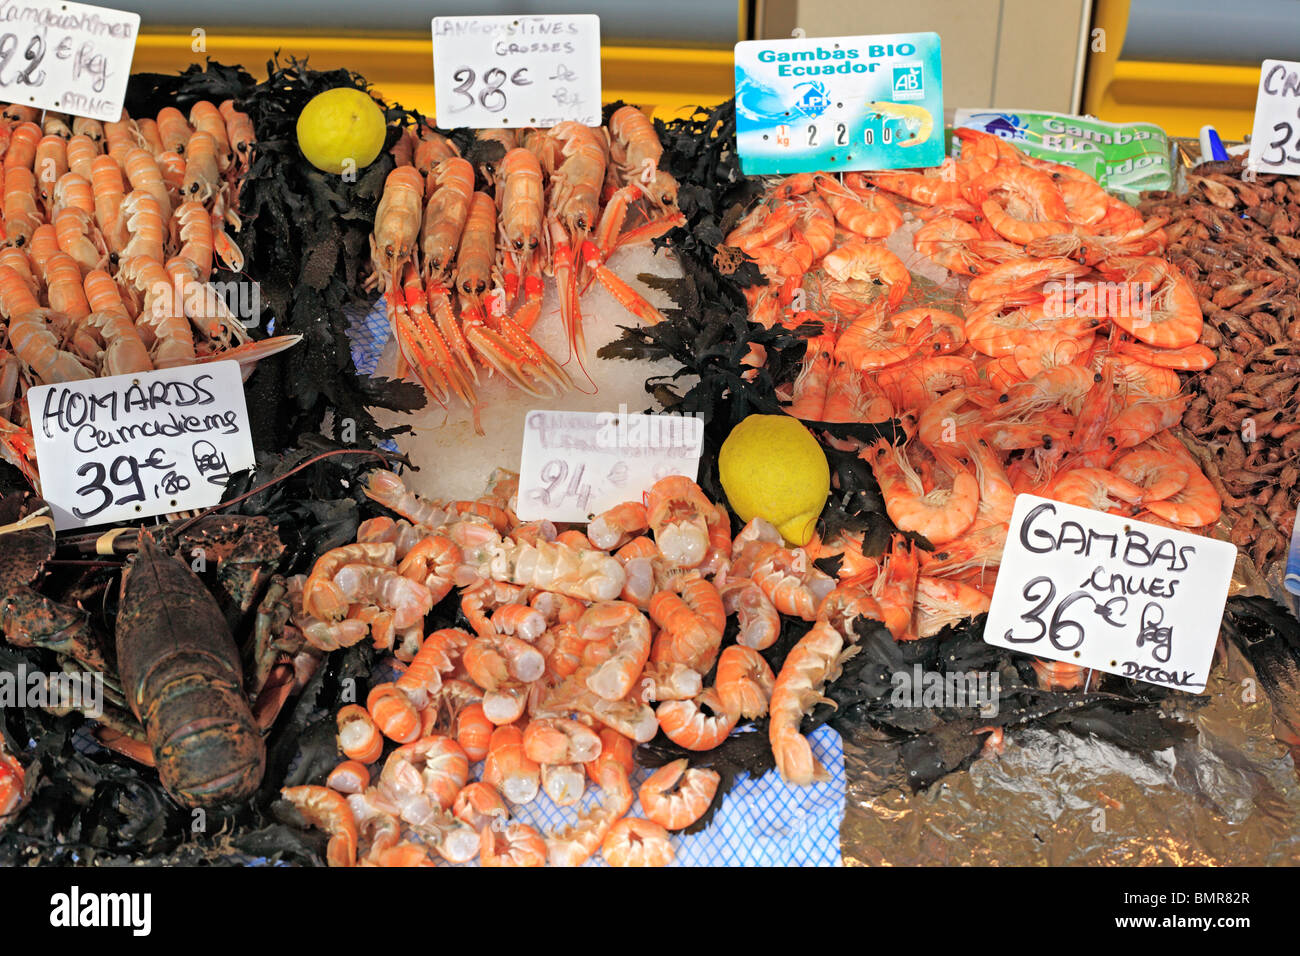 Seafood market, Le Havre, Seine-Maritime department, Upper Normandy, France Stock Photo